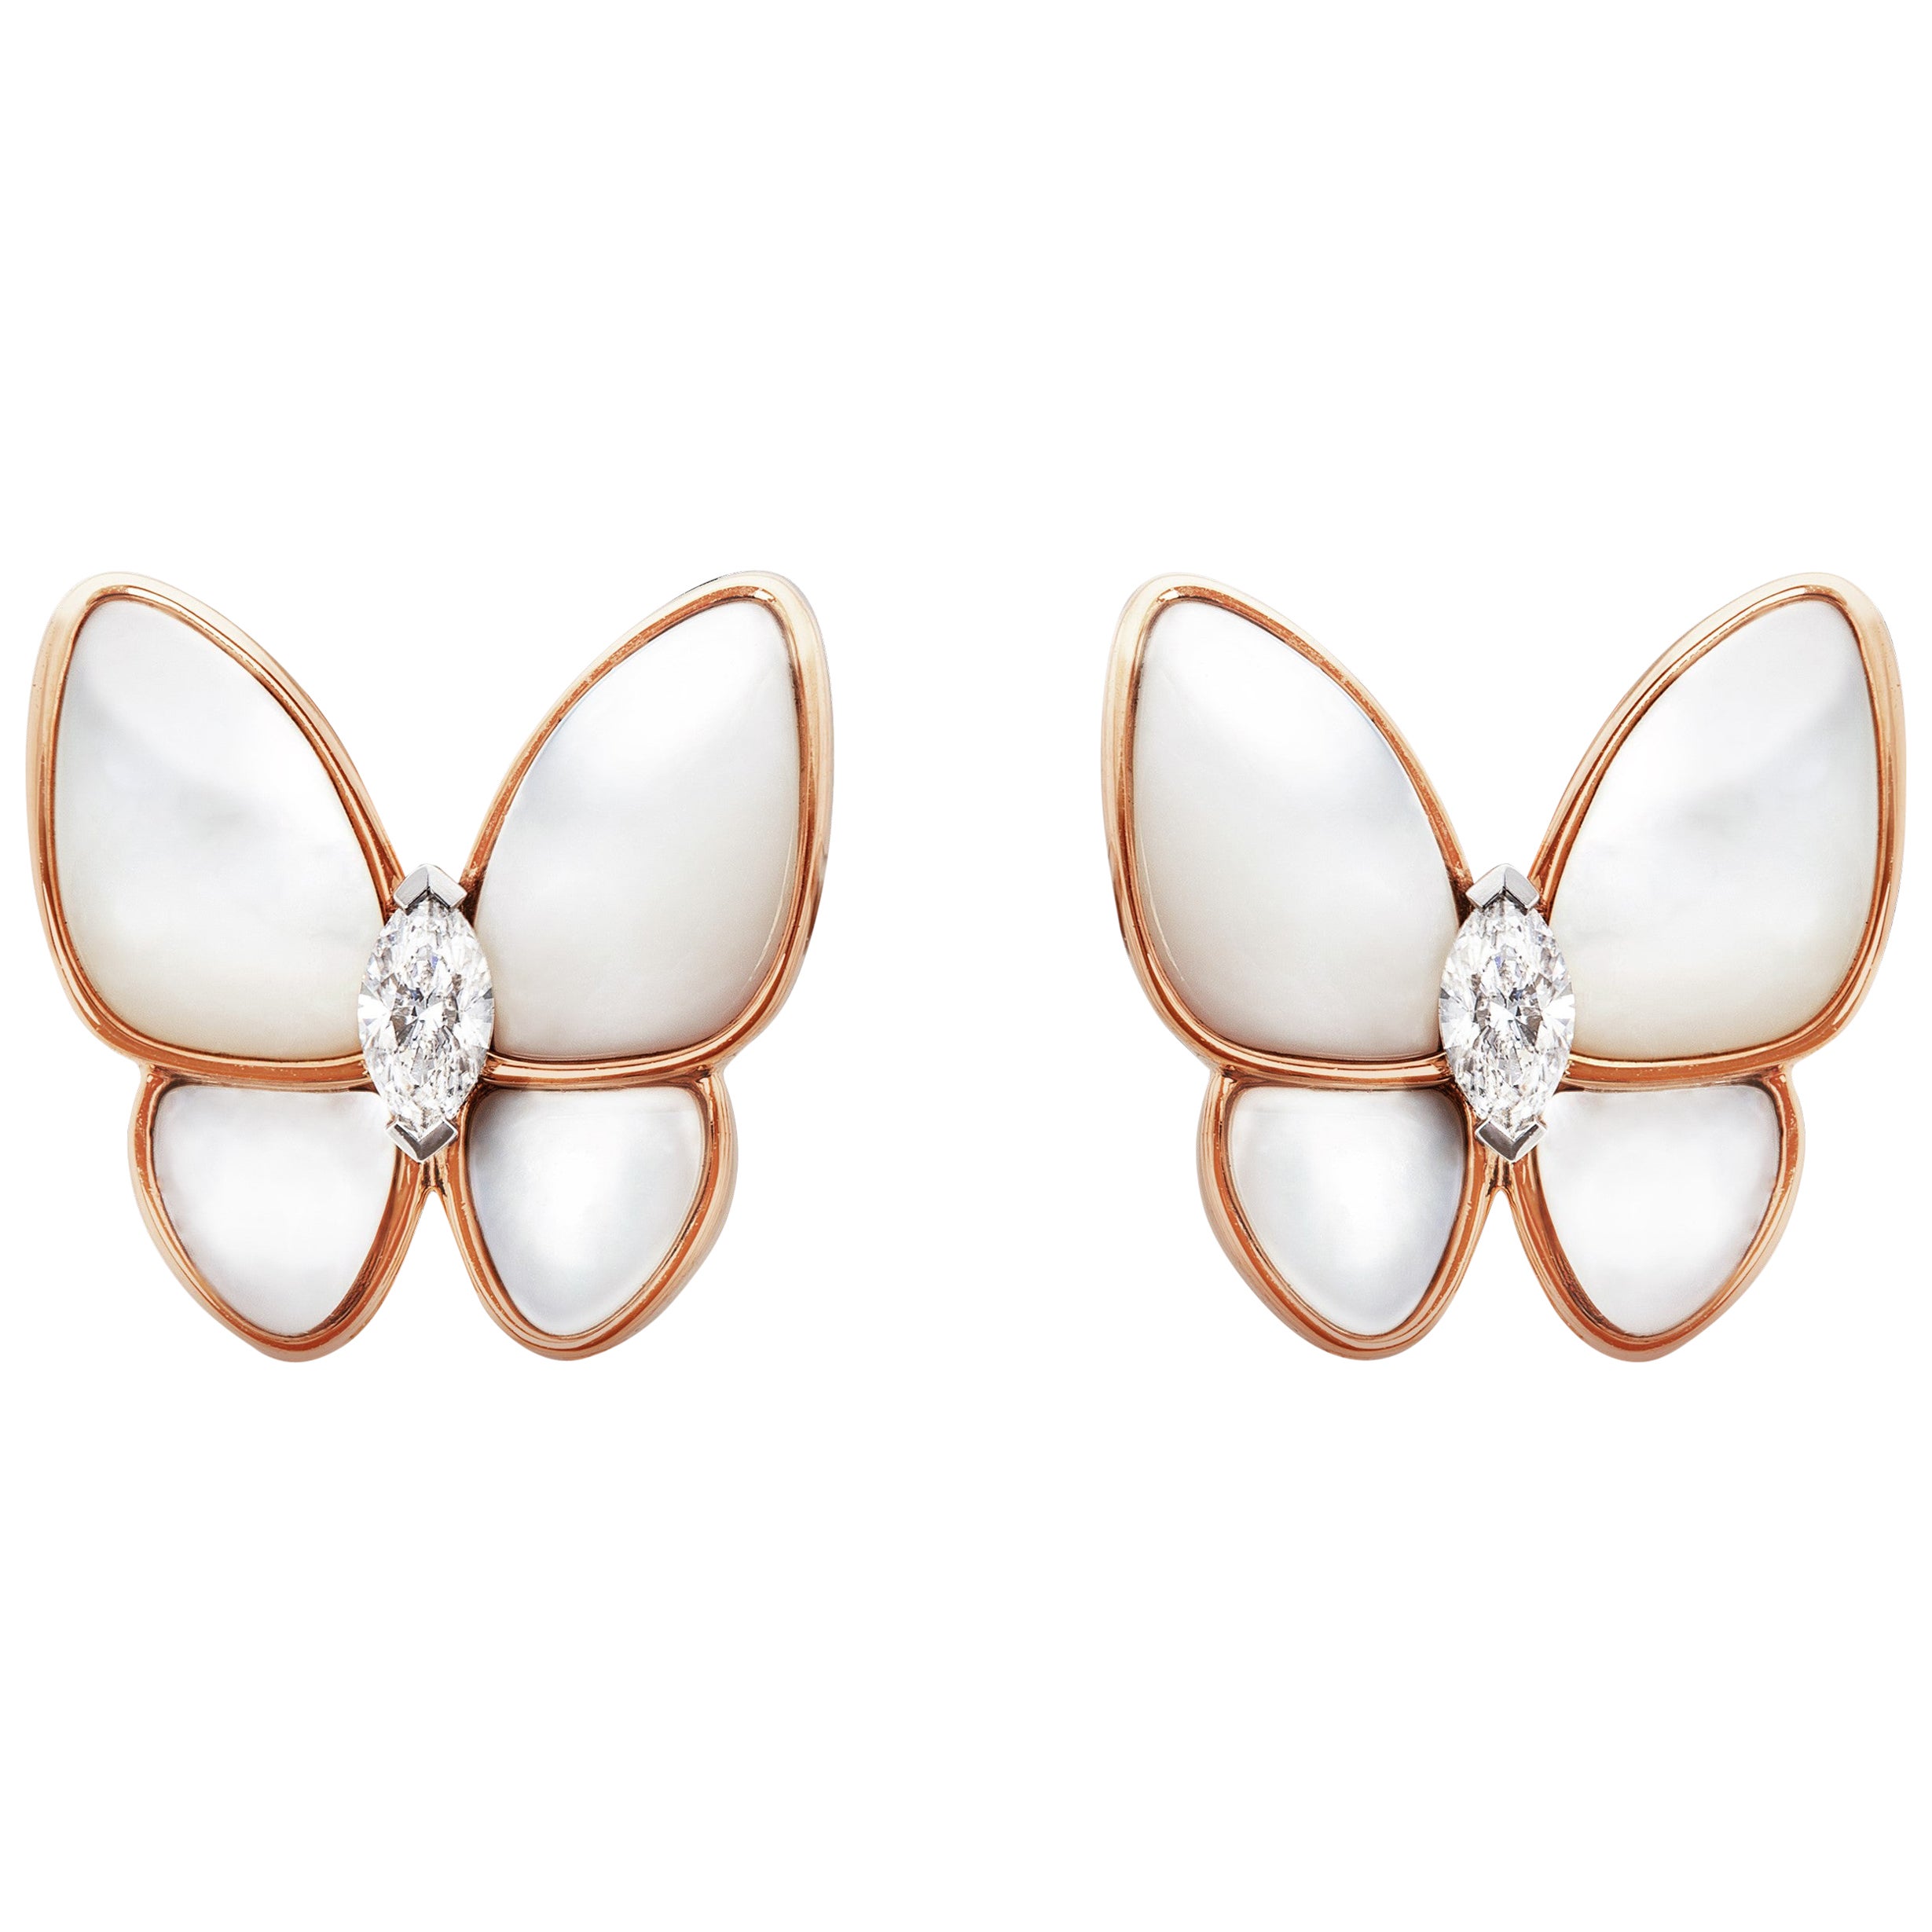 Van Cleef & Arpels two Butterfly rose Gold mop and marquise Diamonds Earrings